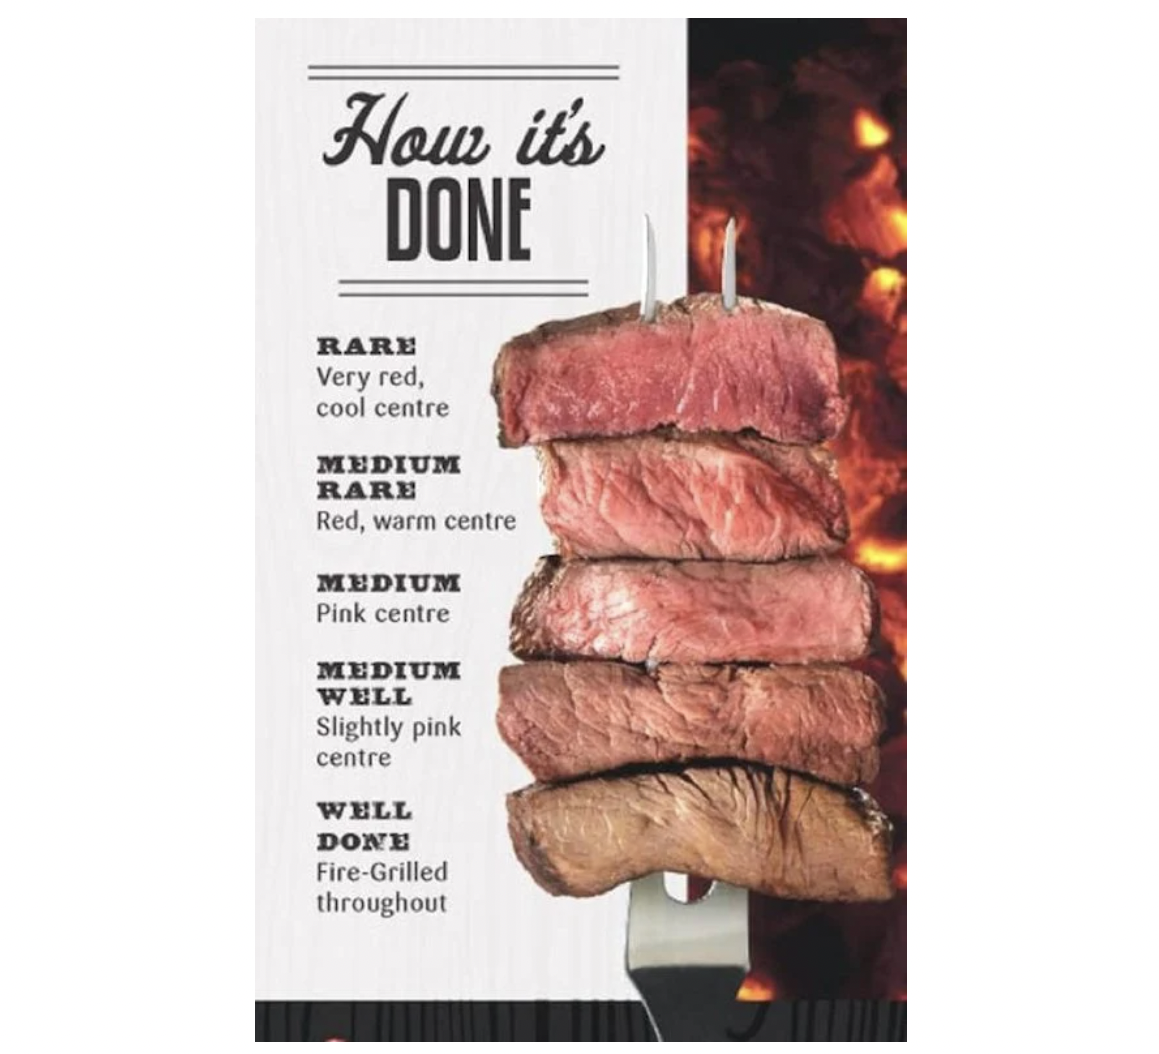 how to be a man - steak how its done - How it's Done Rare Very red, cool centre Medium Rare Red, warm centre Medium Pink centre Medium Well Slightly pink centre Wull Done FireGrilled throughout